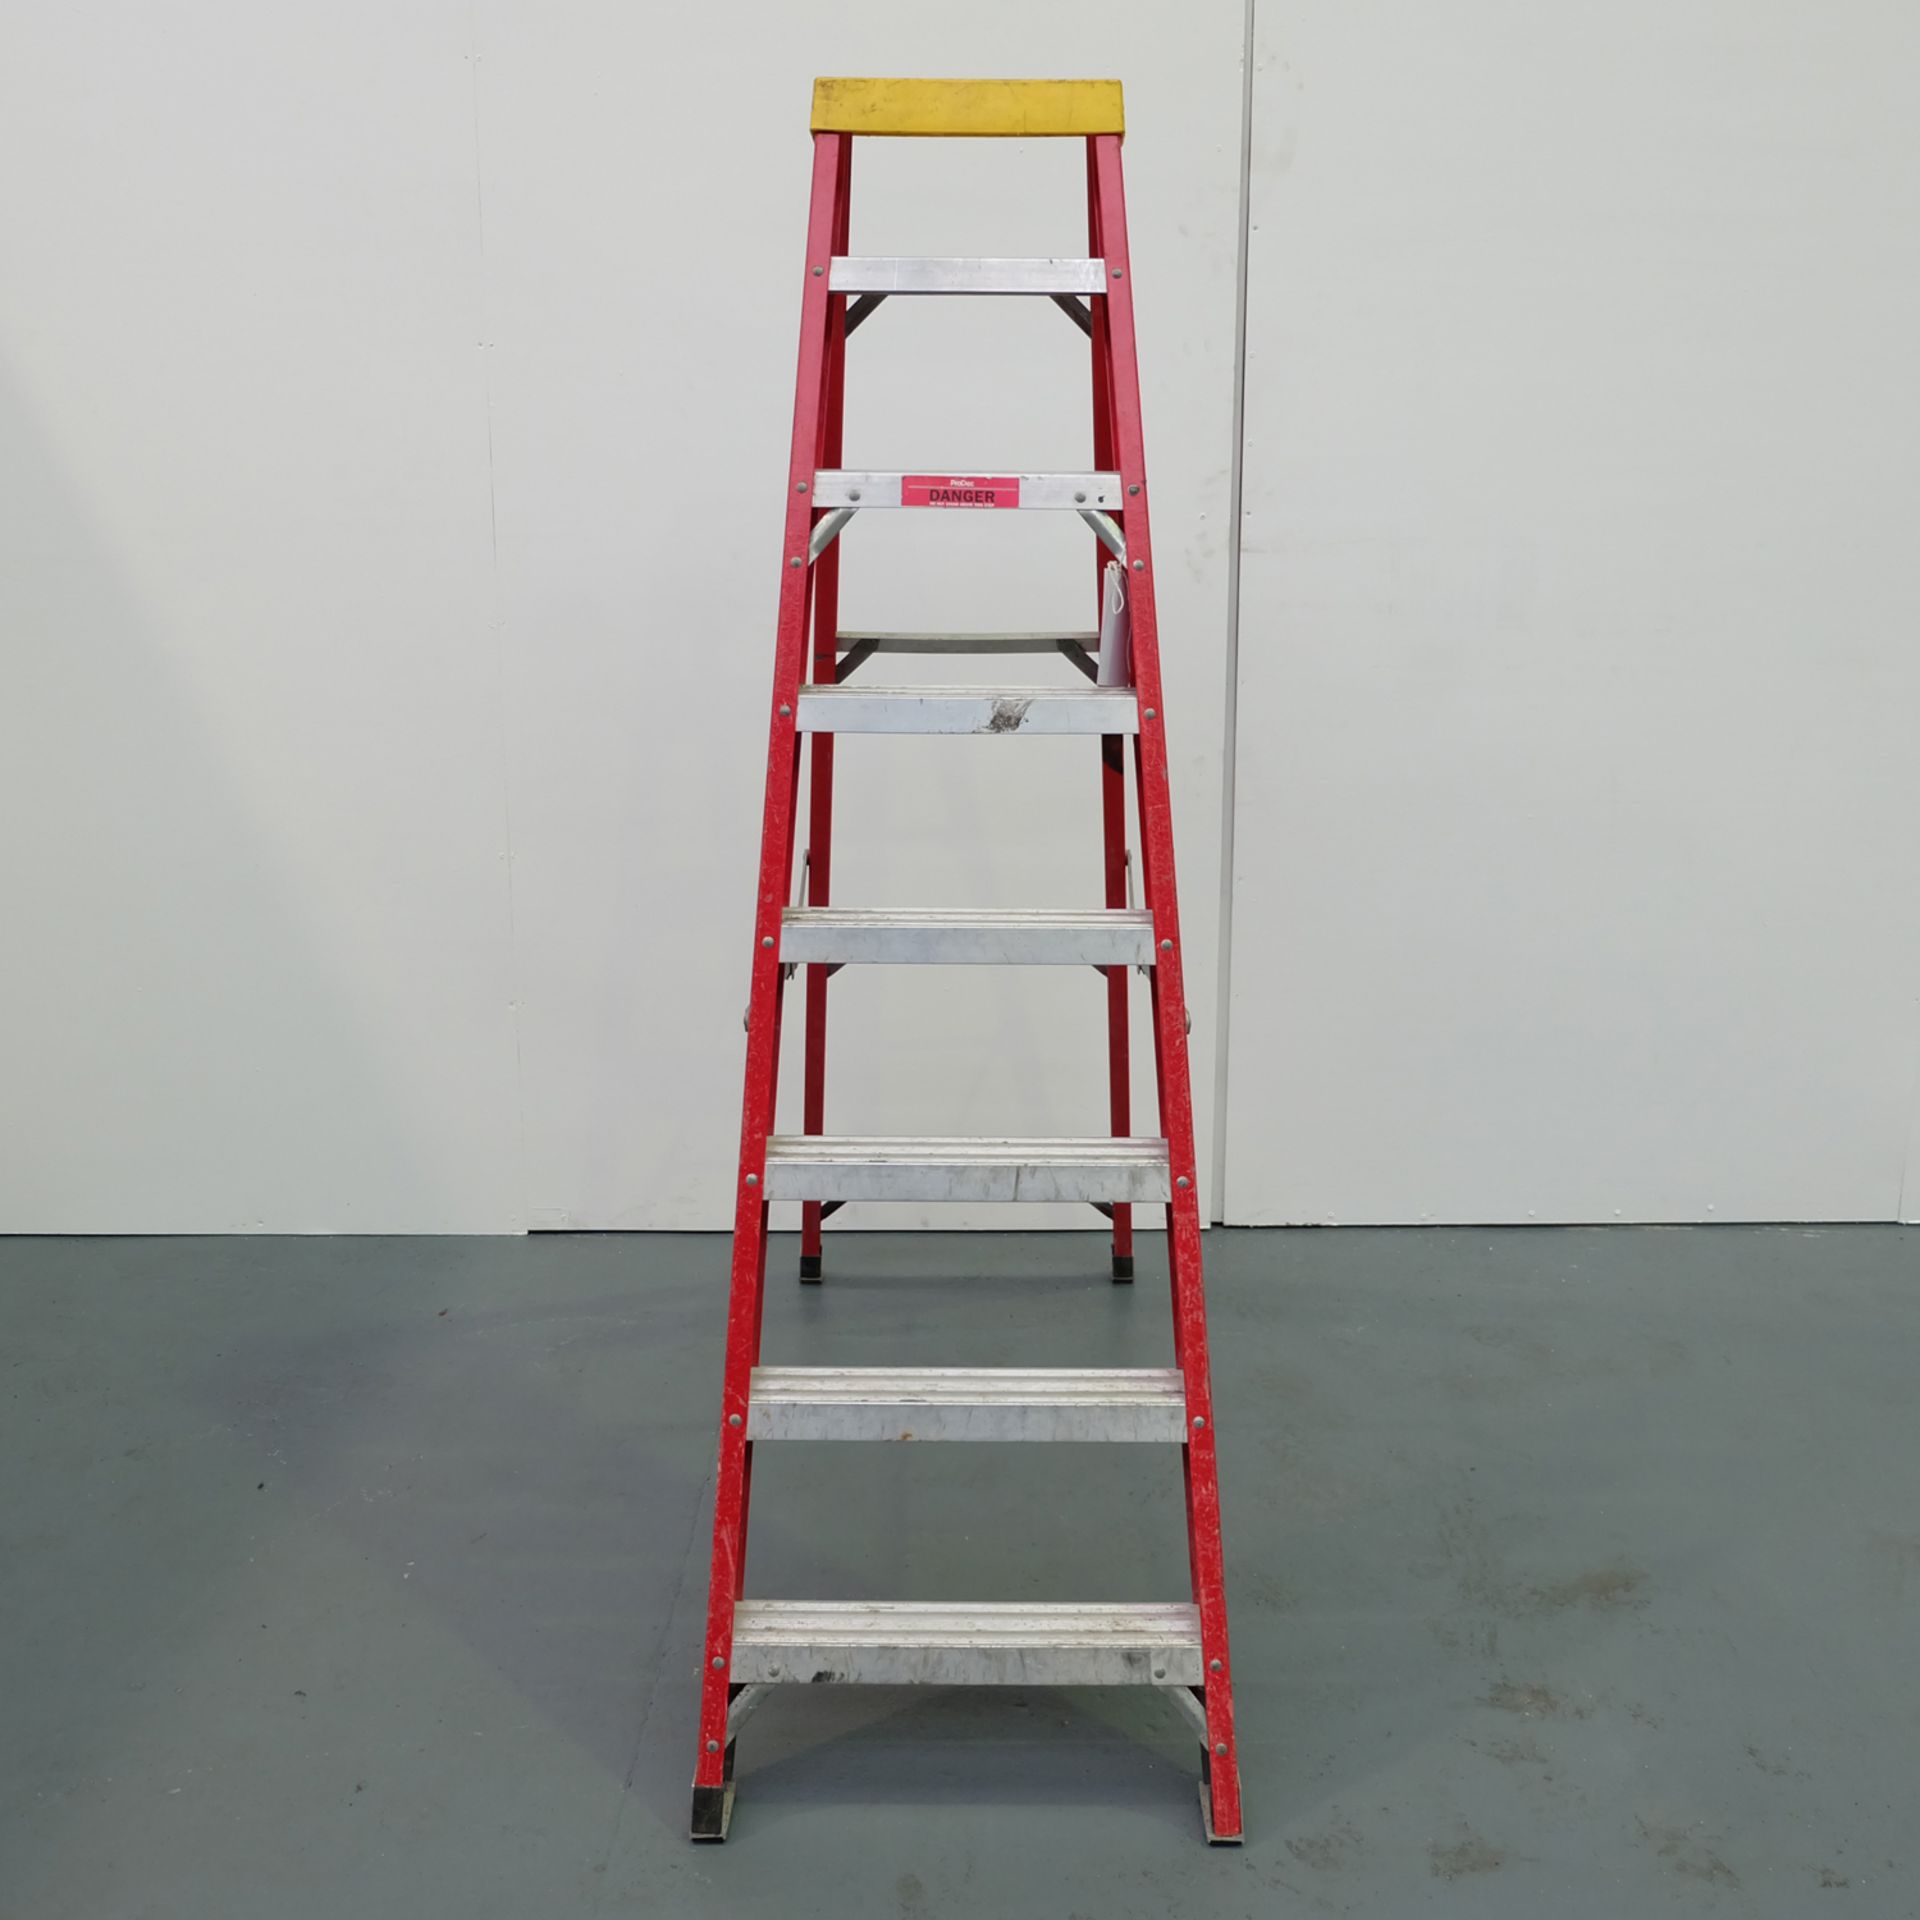 ProDec Step Ladders. Overall Height 70 1/2" Approx. - Image 4 of 4